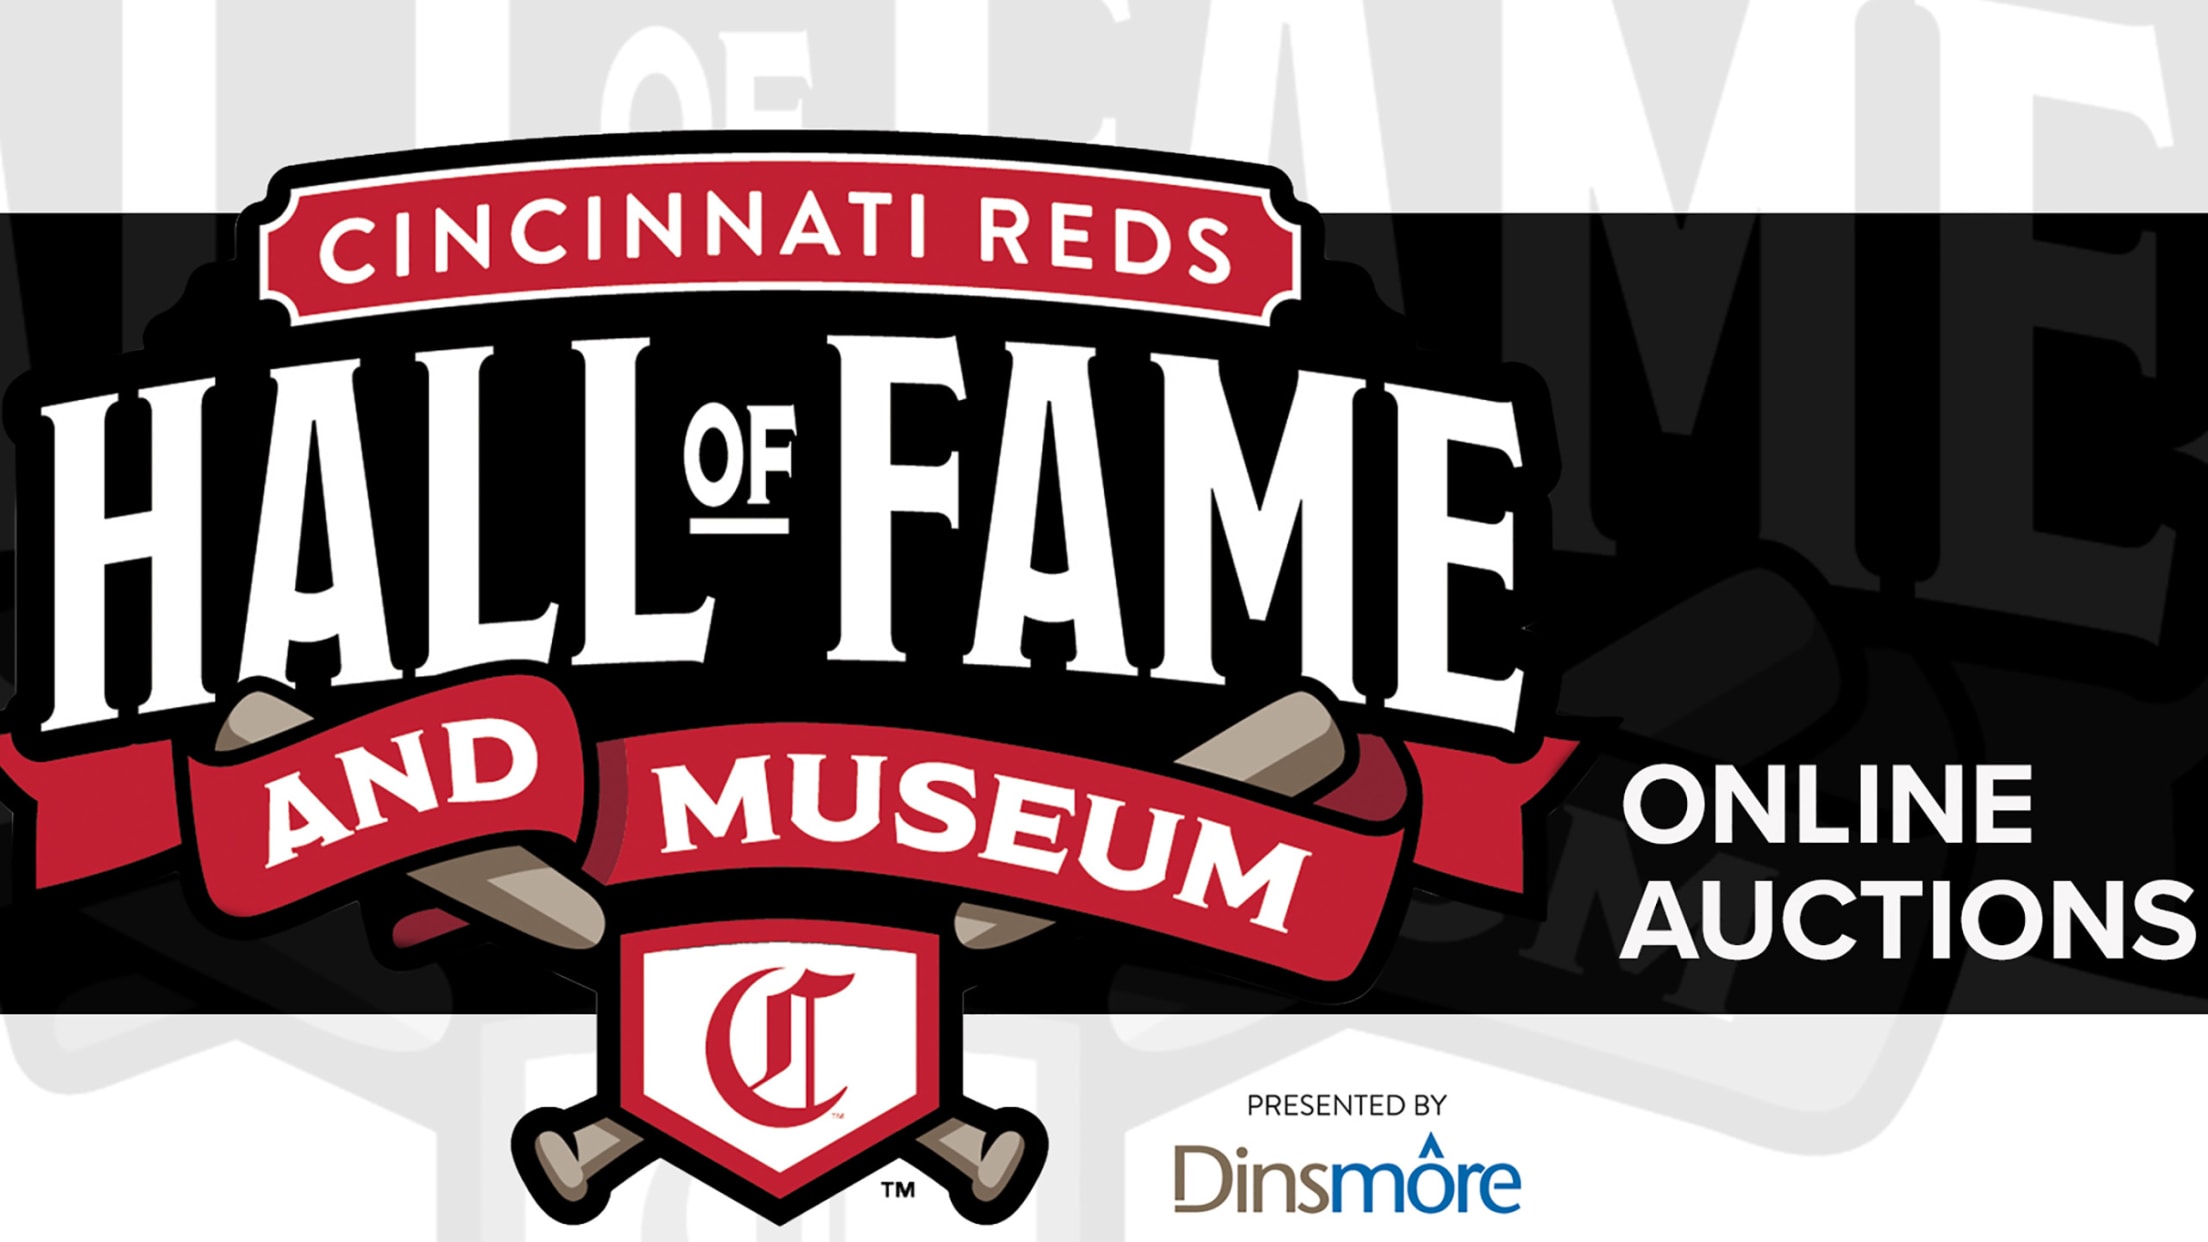 Reds Hall of Fame & Museum